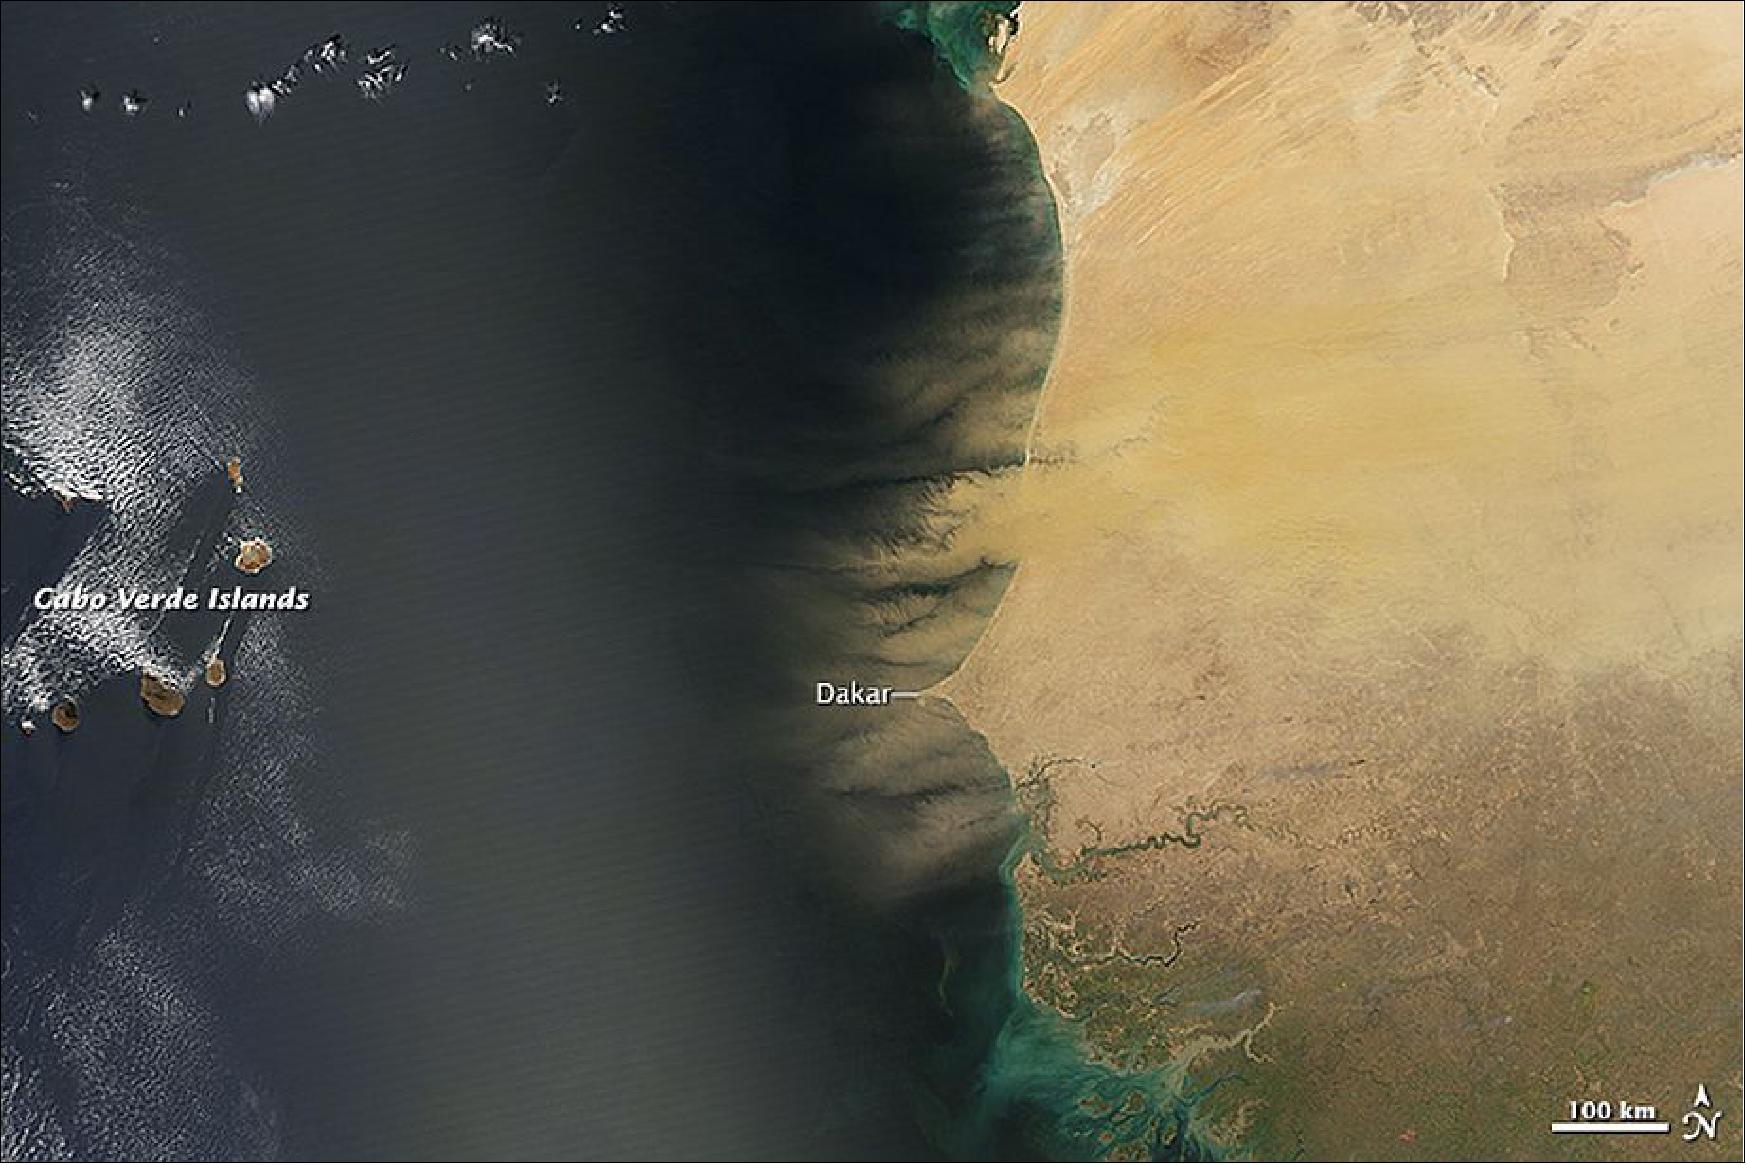 Figure 125: Thick dust plumes obscure Africa’s coast in this MODIS image acquired on Feb. 26, 2015 (image credit: NASA Earth Observatory)